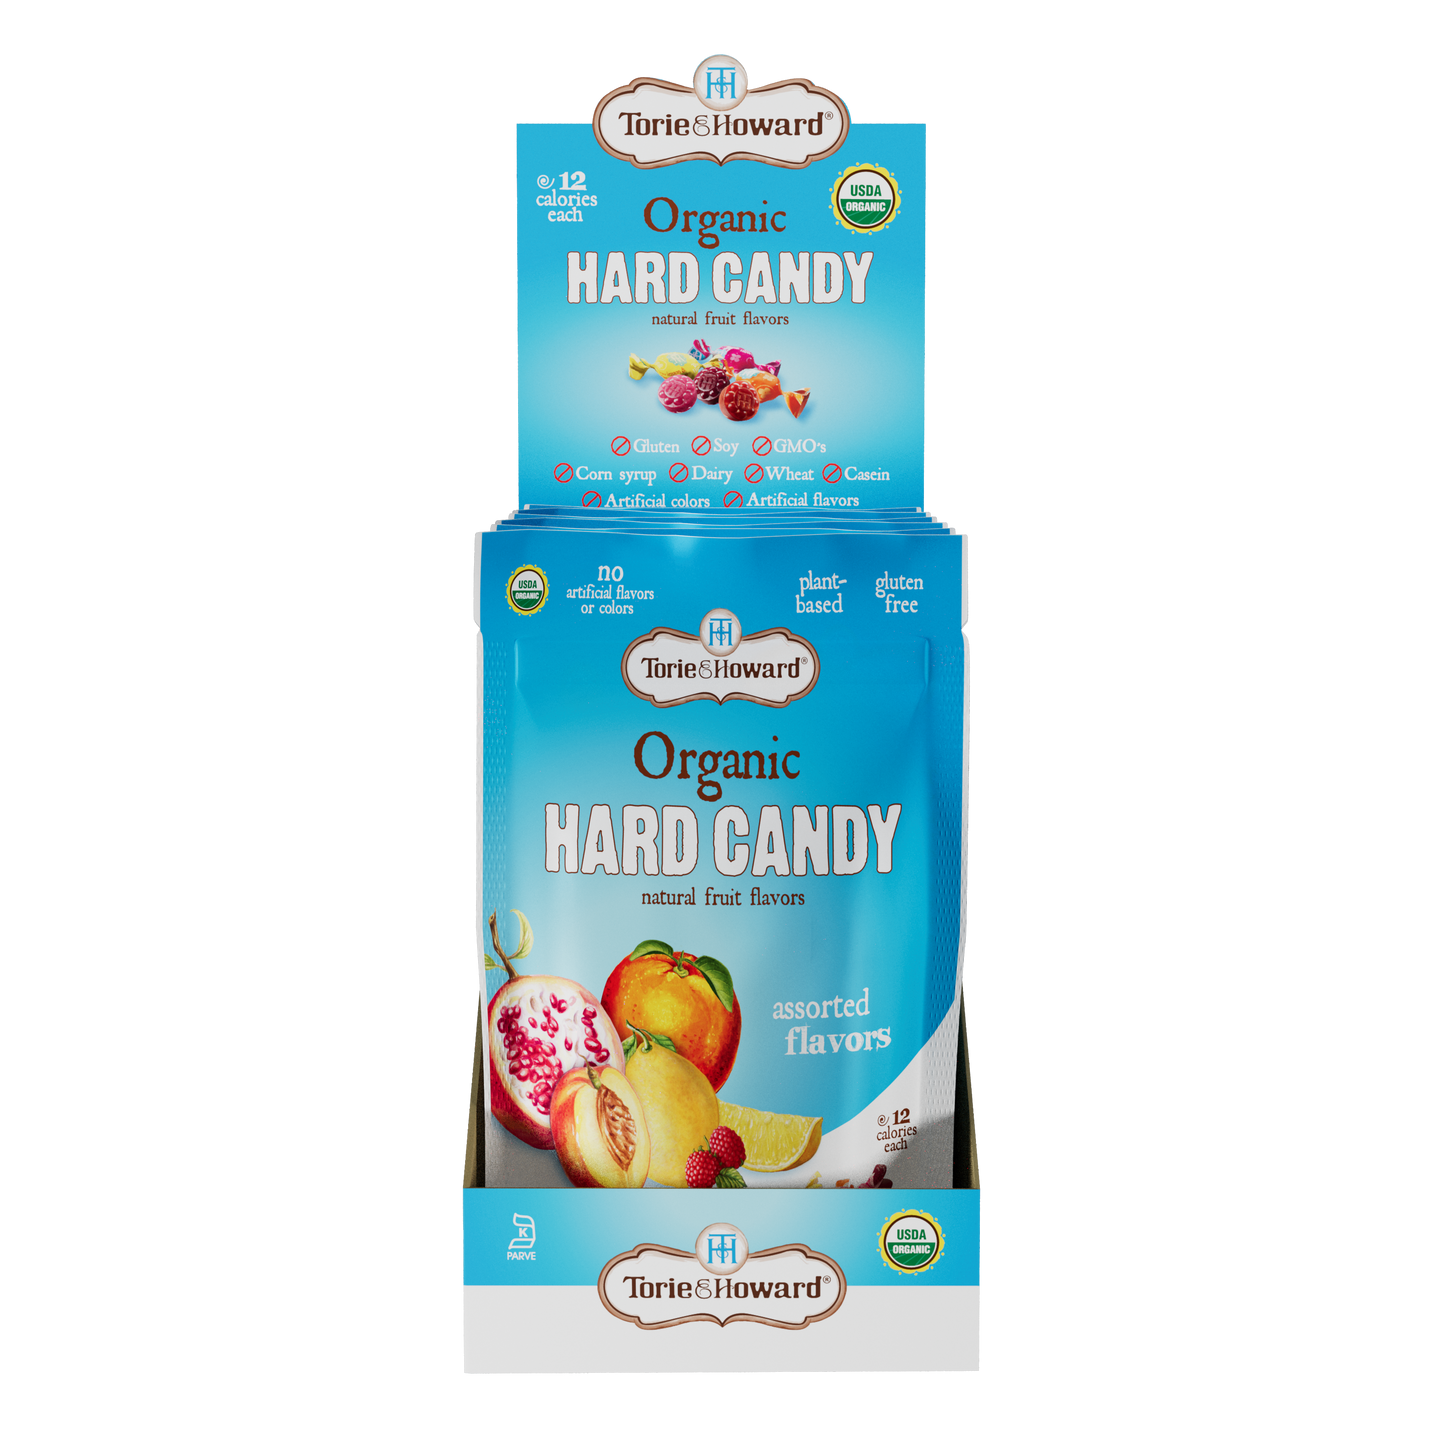 Display caddy containing 6, 3.5oz bags of Torie & Howard Organic Hard Candy in Assorted Flavors